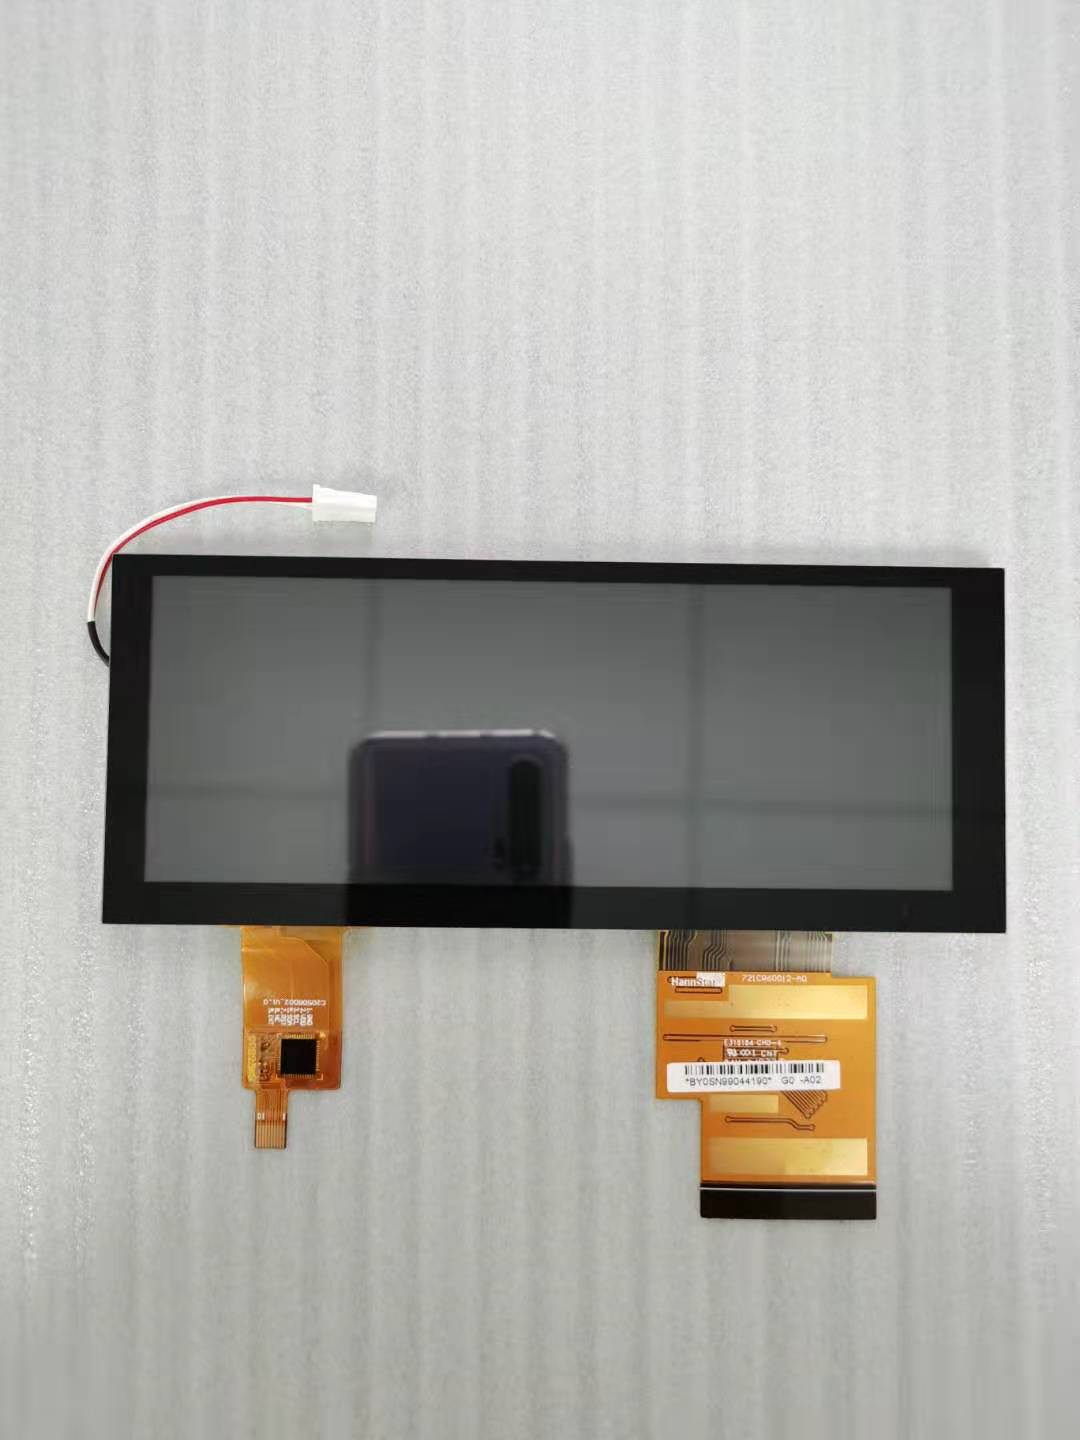 5.8 inch 800 x 320 Bar type color TFT LCD with Mutil-Touch PCAP